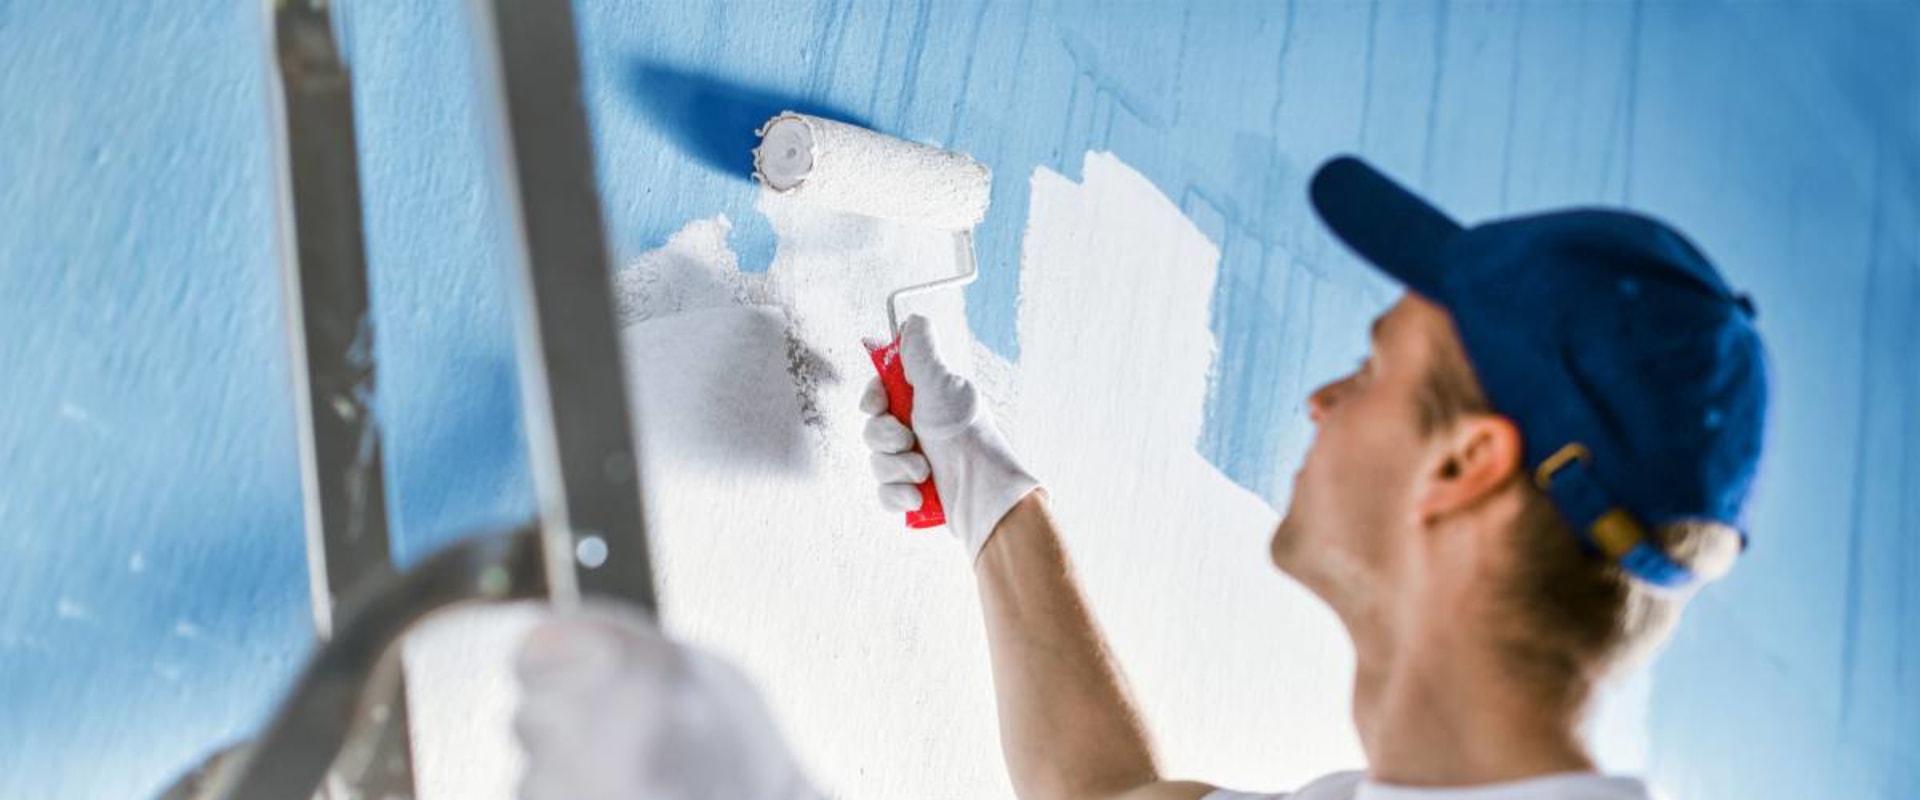 Average Cost of Painting Services in Different States and Cities